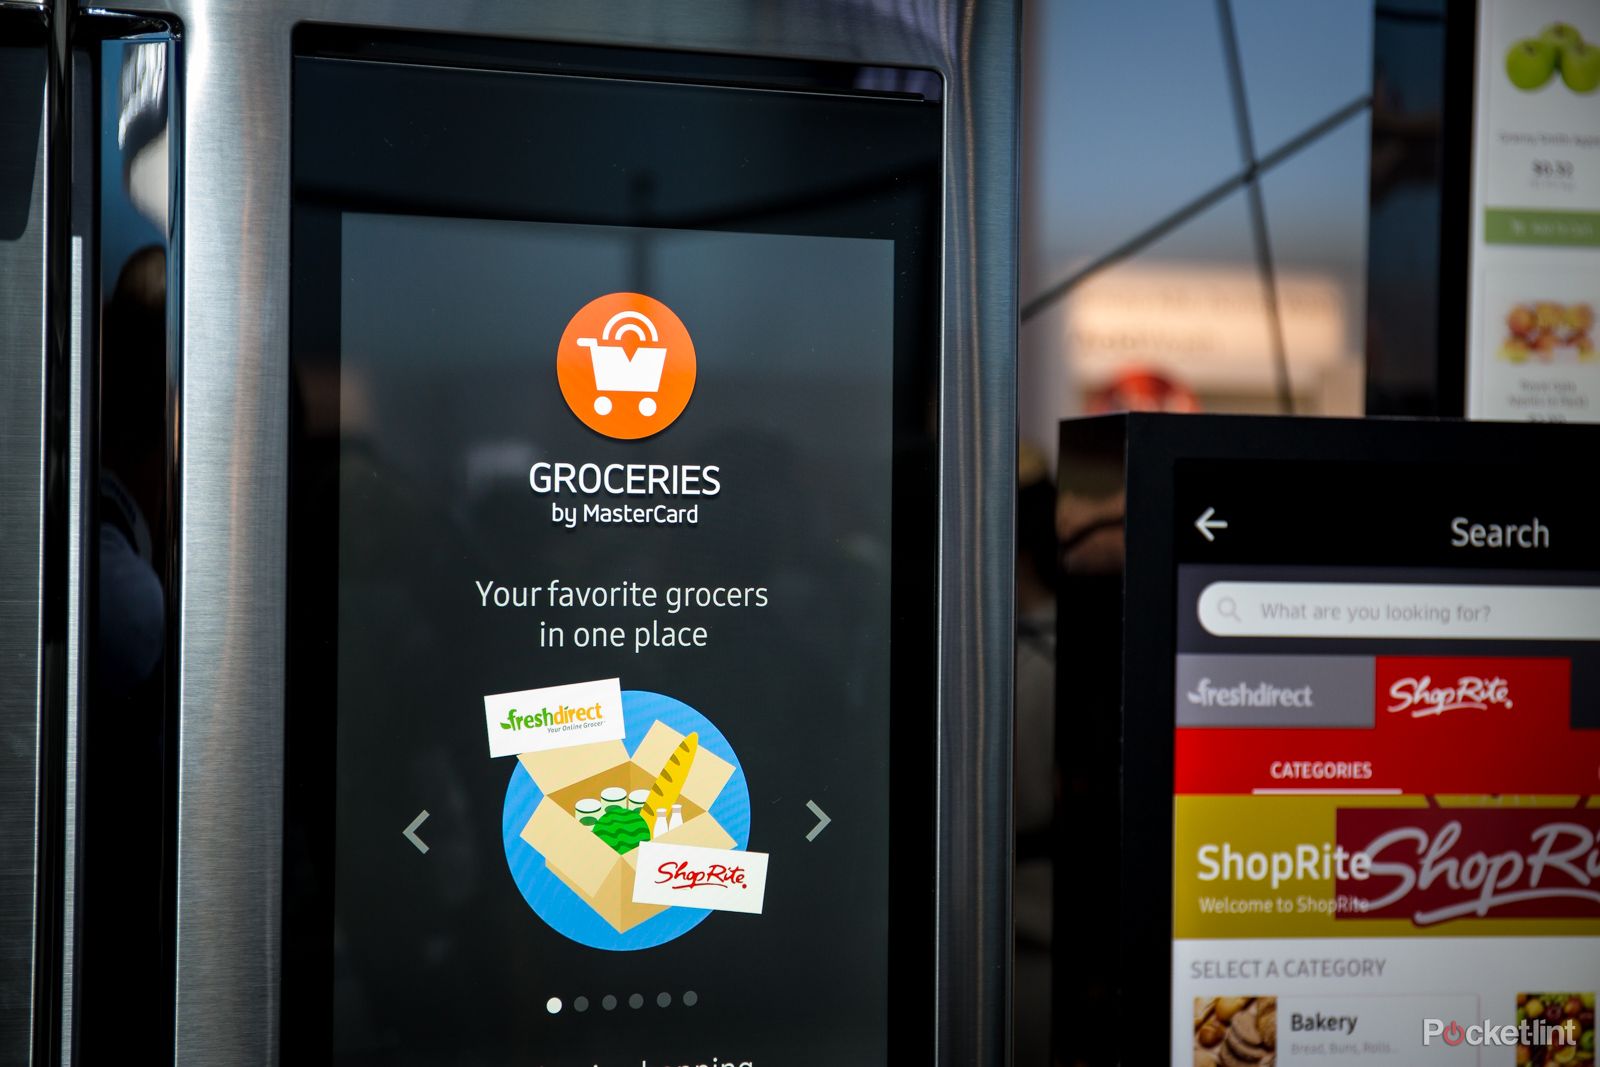 samsung family hub connected fridge now available in uk image 10